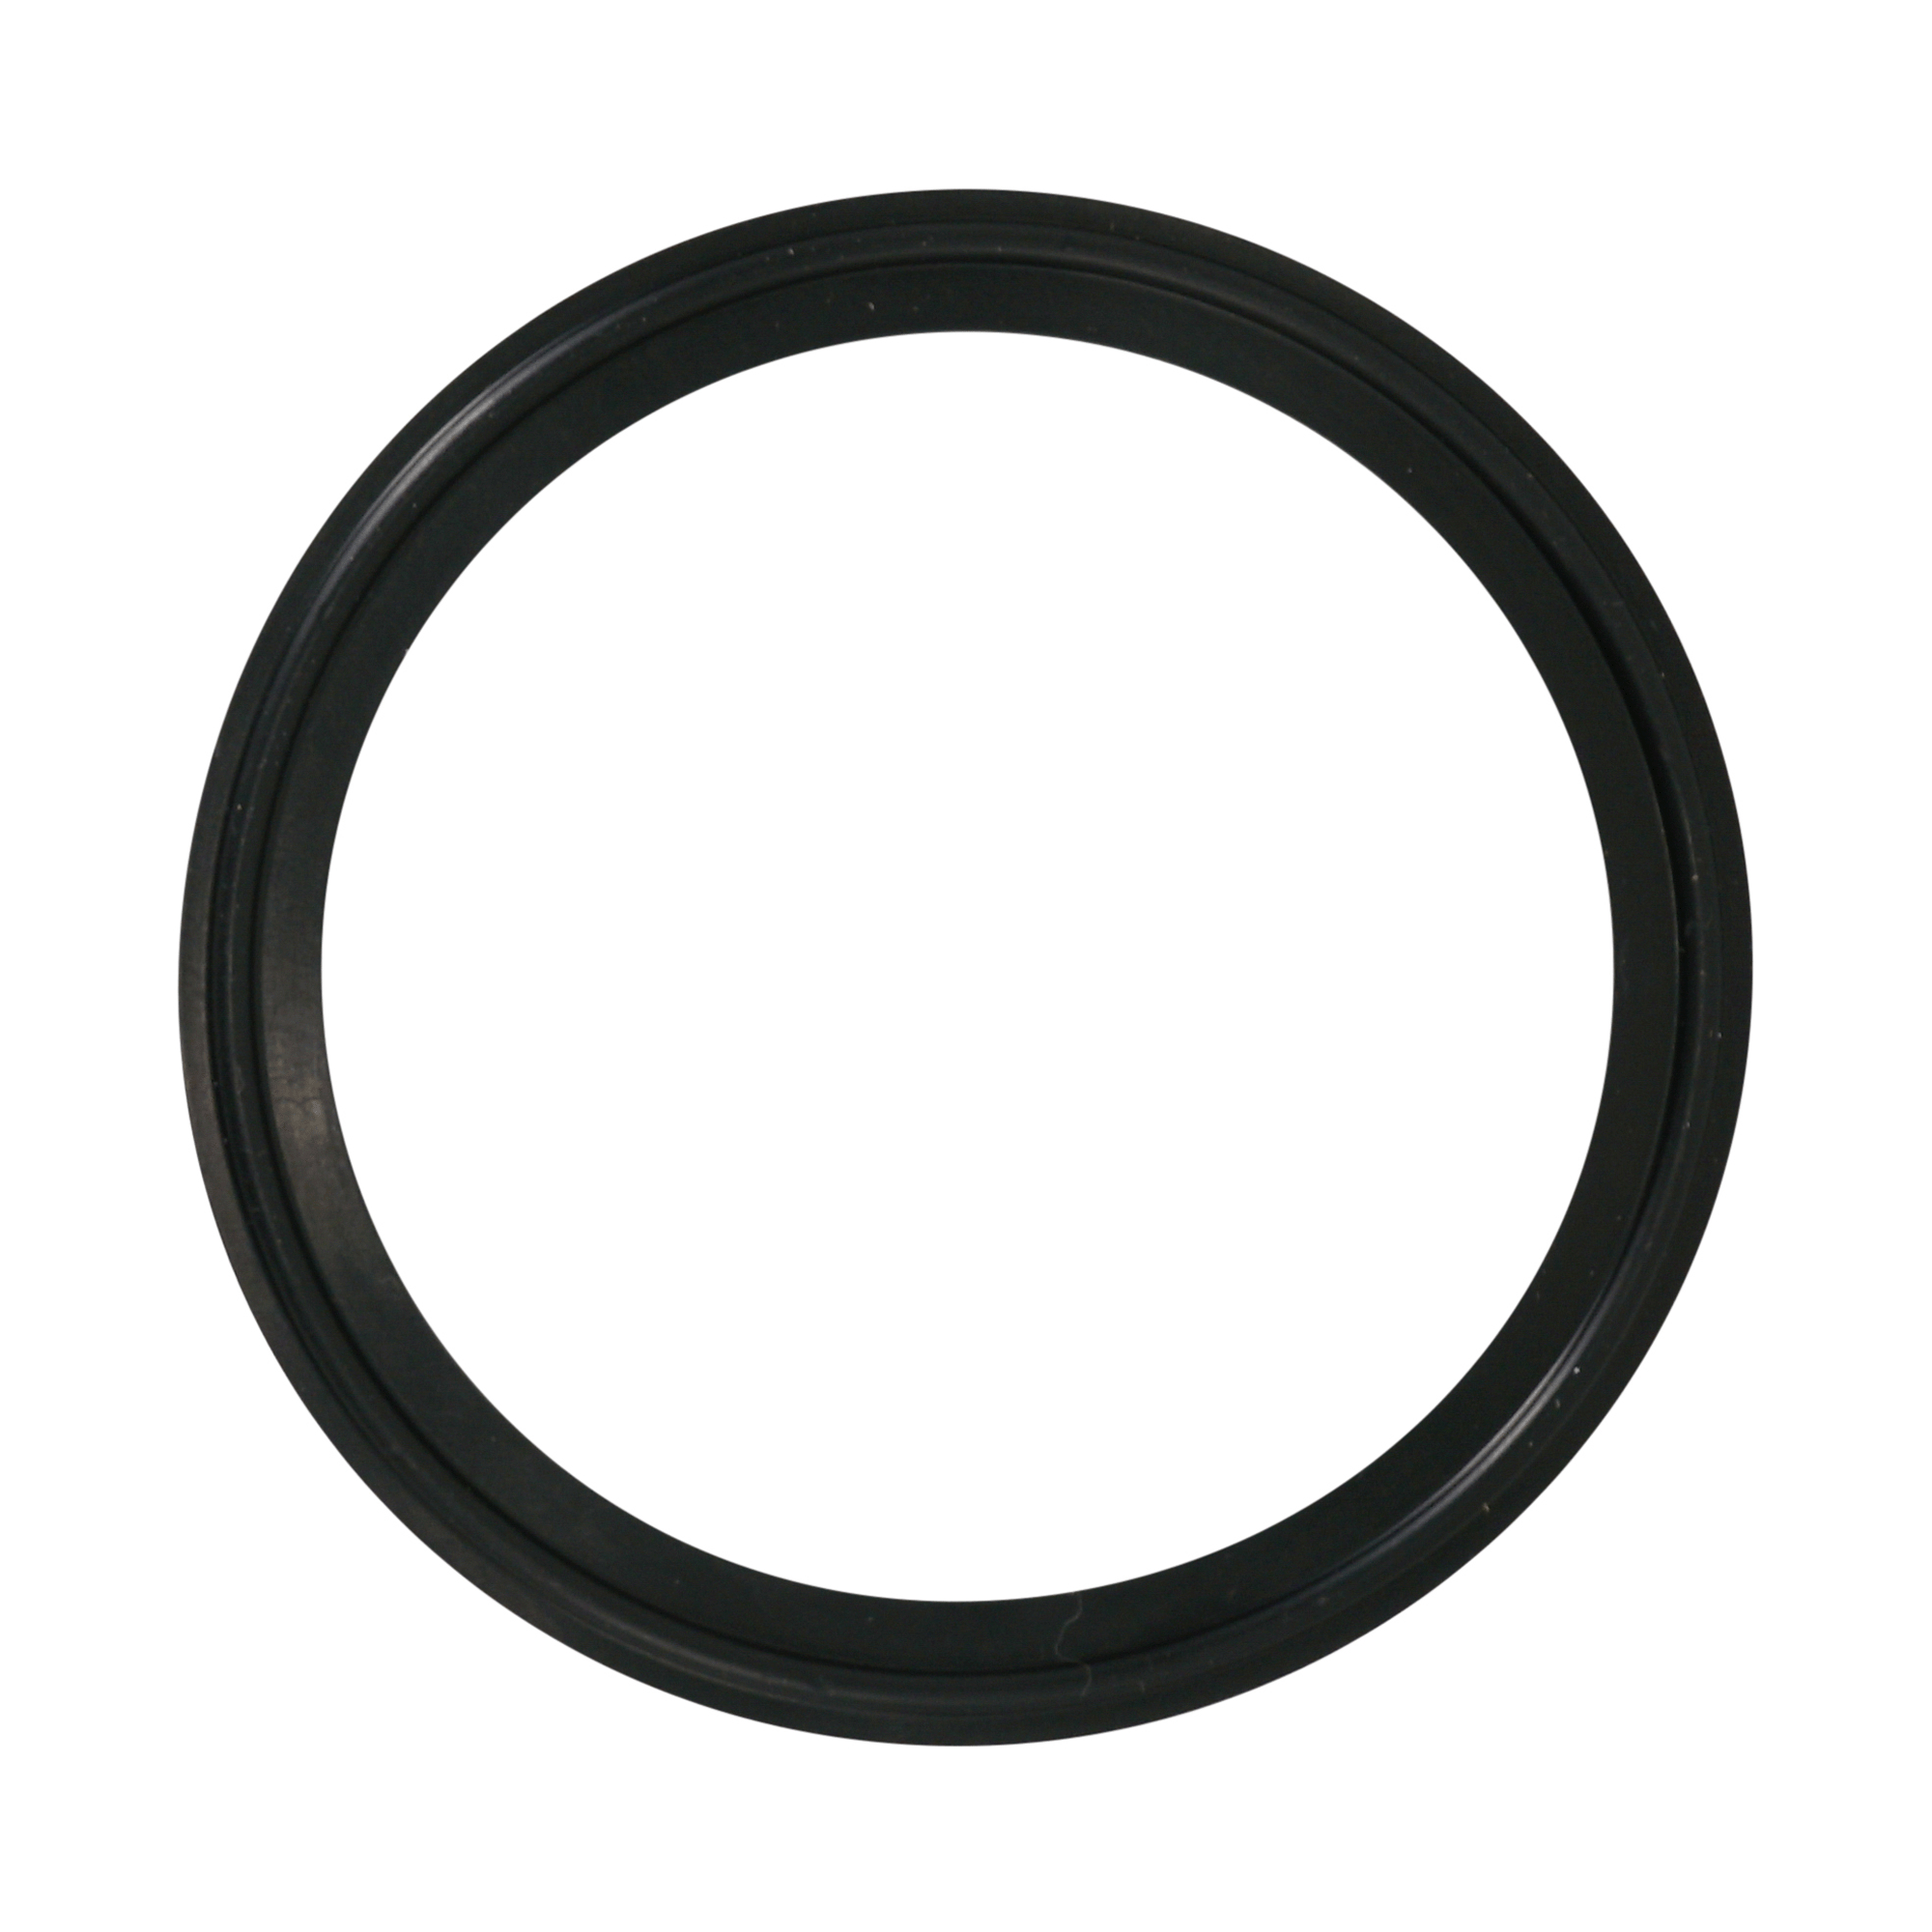 Black 4inch EPDM Rubber O Ring, 80 Shore A, Round at Rs 2.6/piece in  Bengaluru | ID: 2849745116888